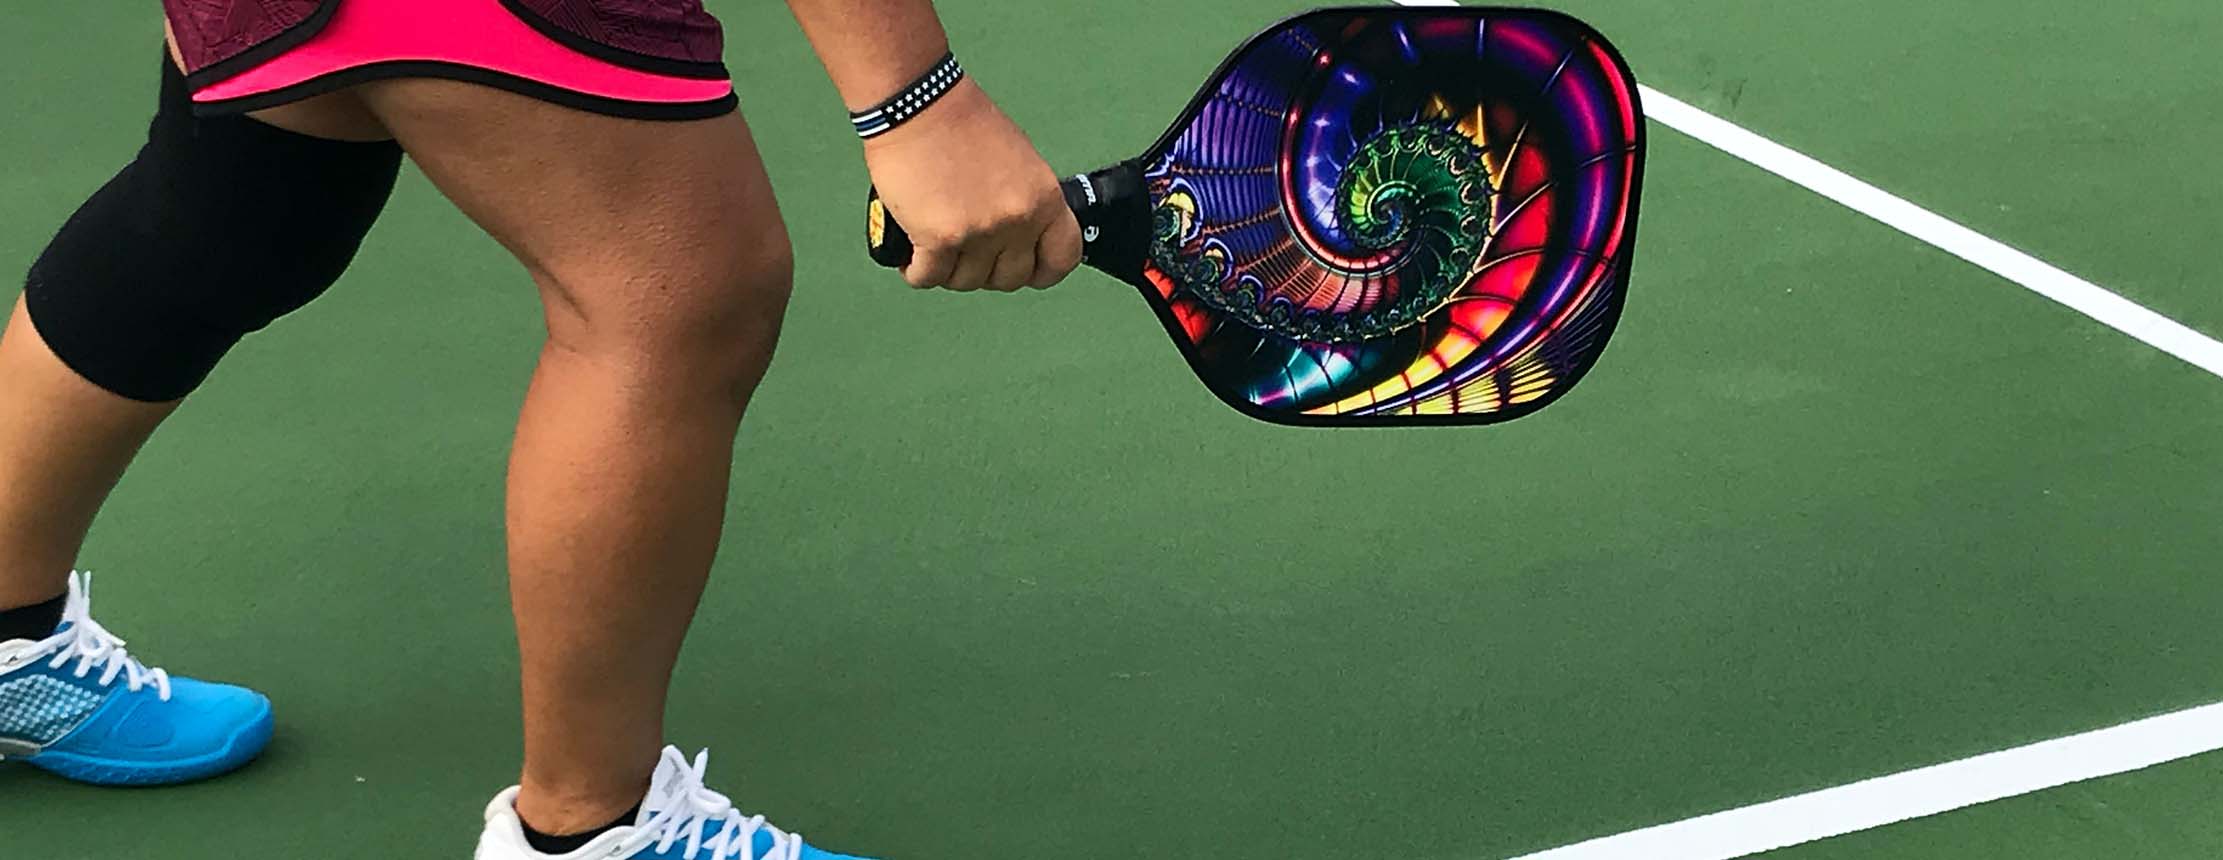 Pickleball player with colourful paddle